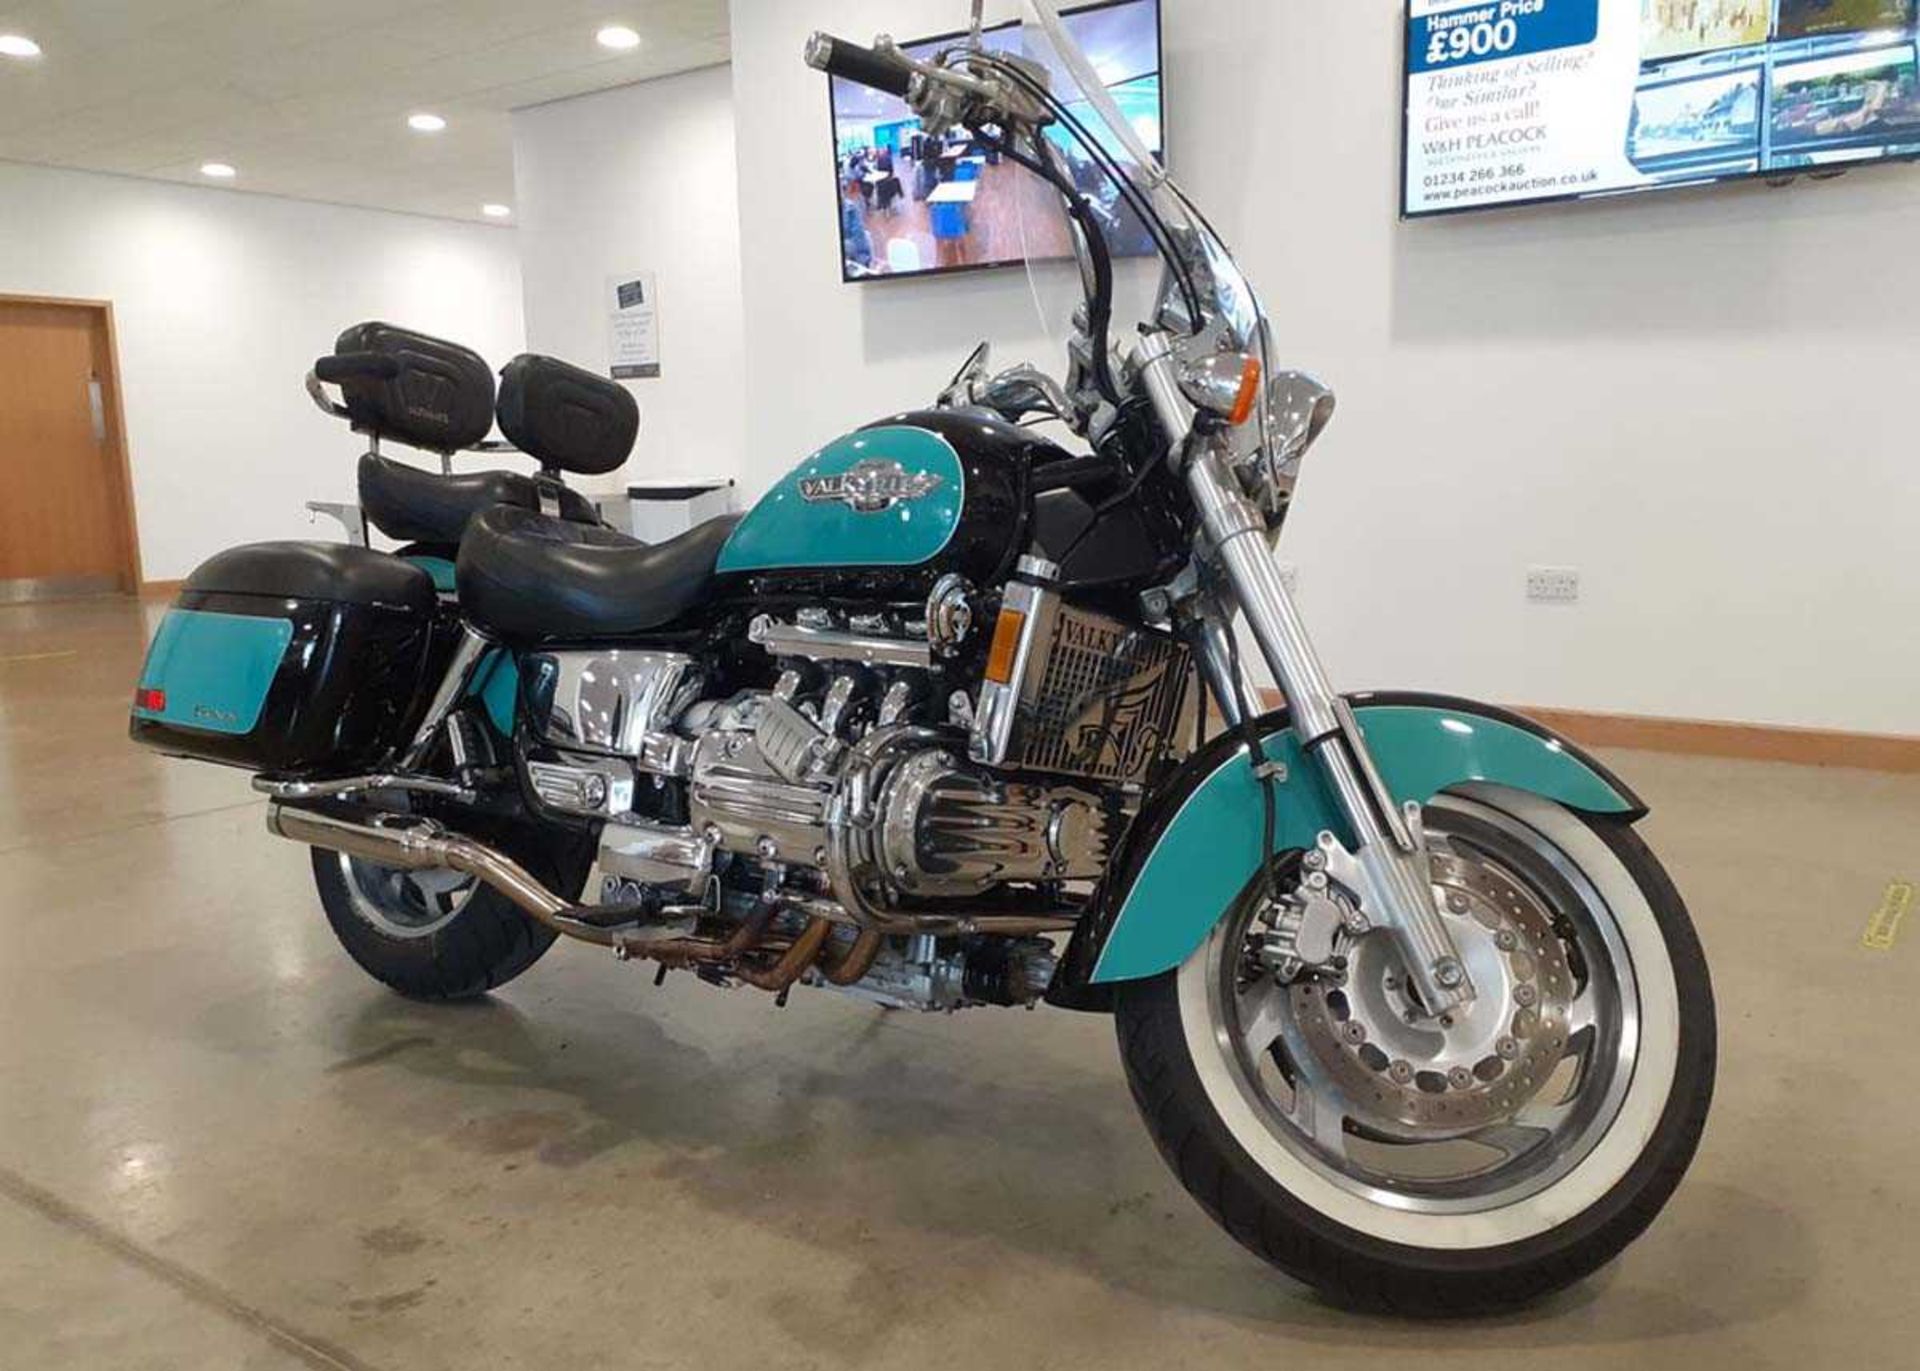 (1998) Honda Valkyrie F6 Tourer Motorbike in turquoise and black, first registered in UK 01/08/21,